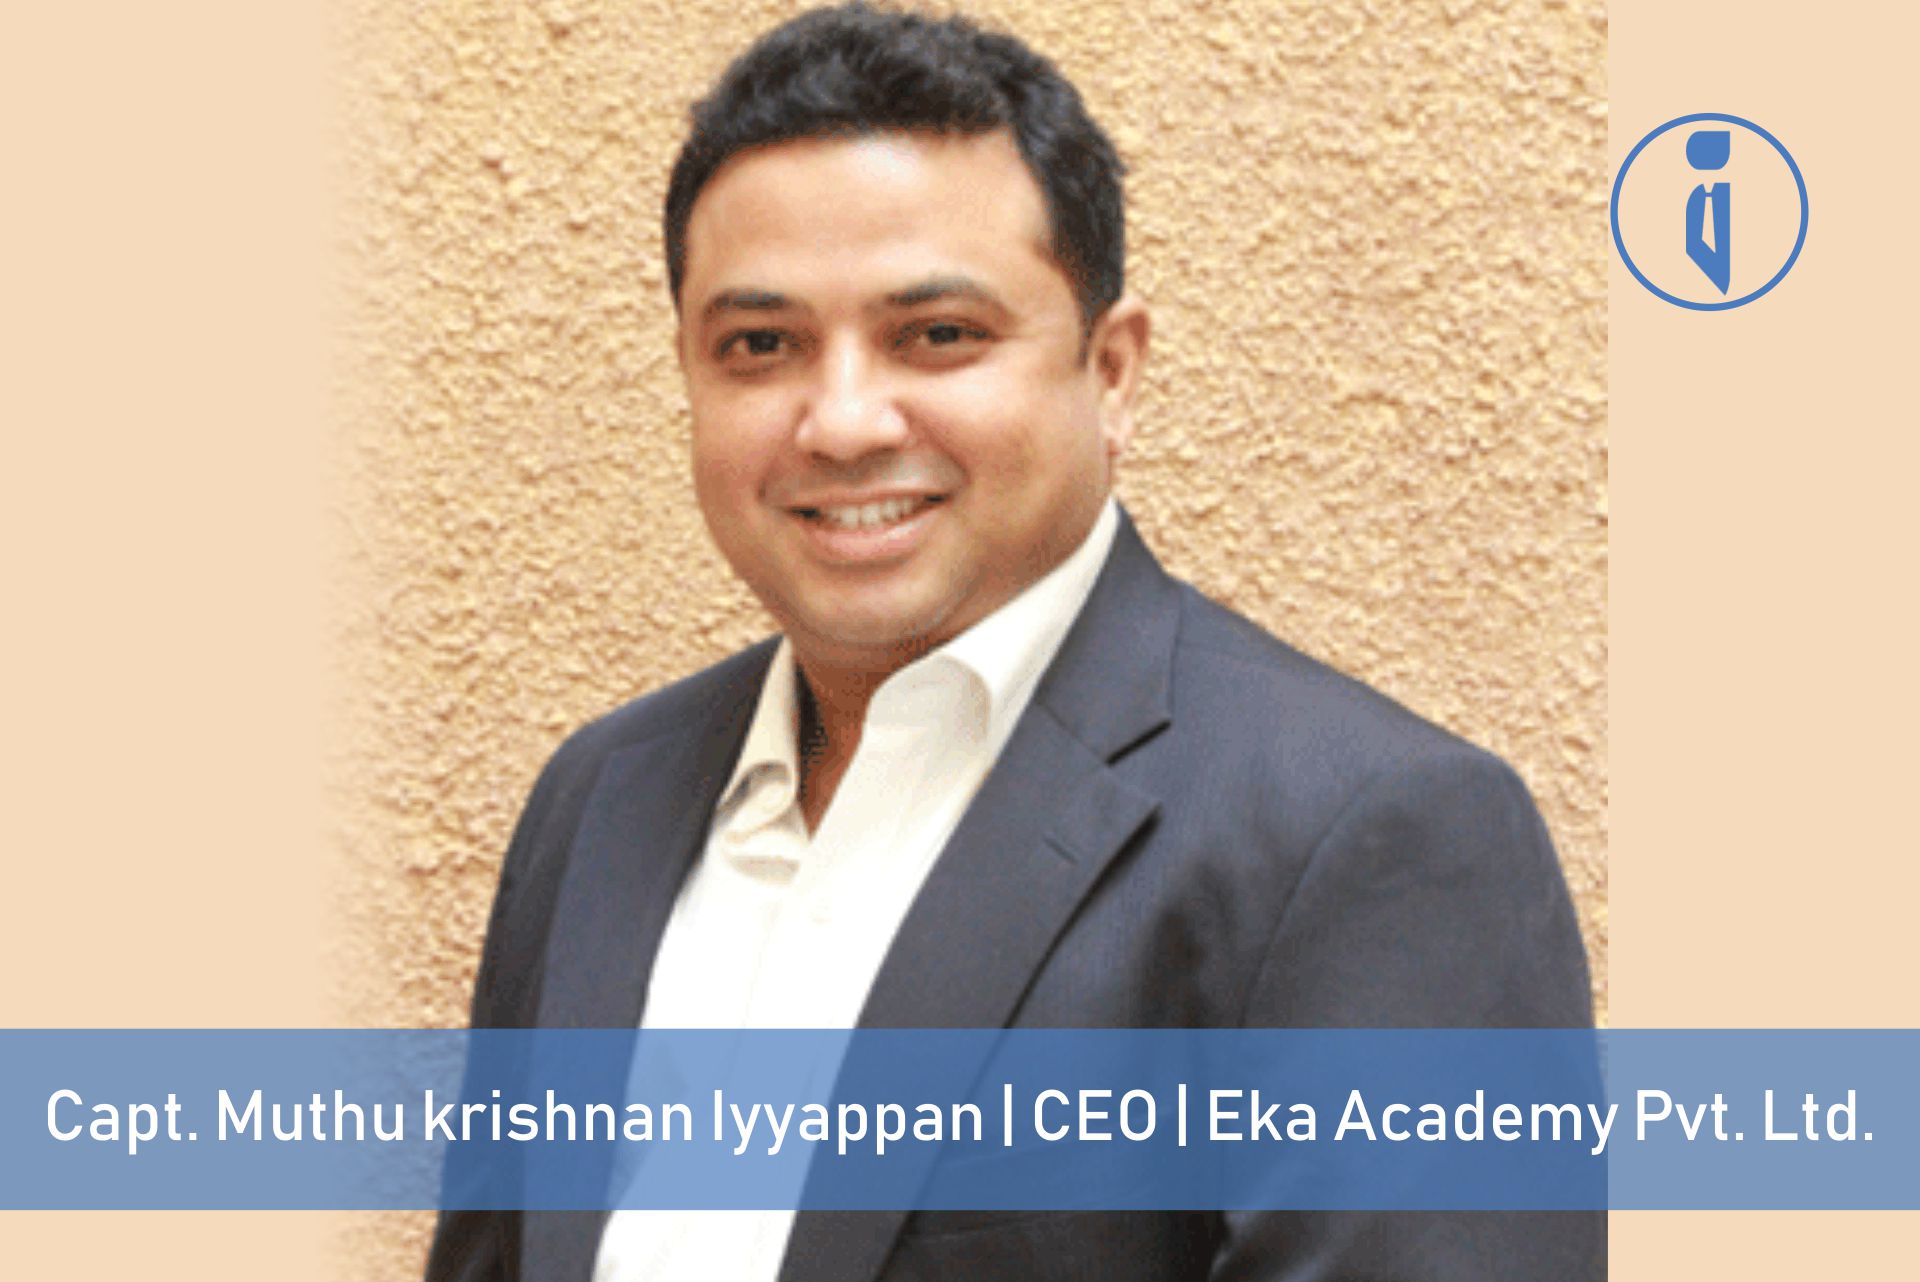 Eka Academy an interesting journey with this company